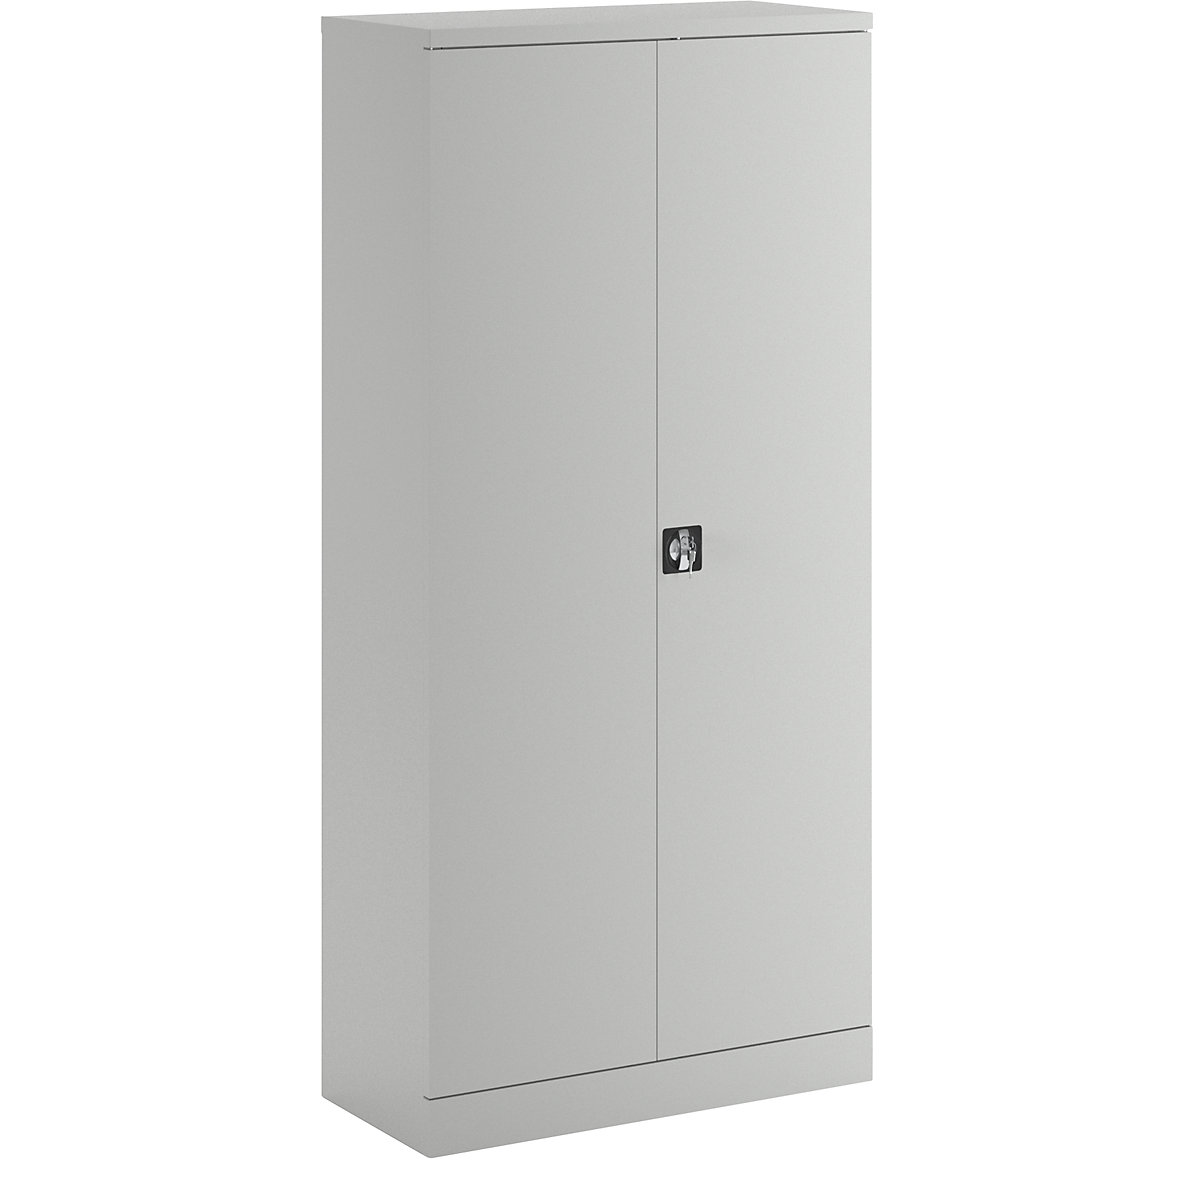 Universal cupboard with hinged doors and 4 shelves – eurokraft basic